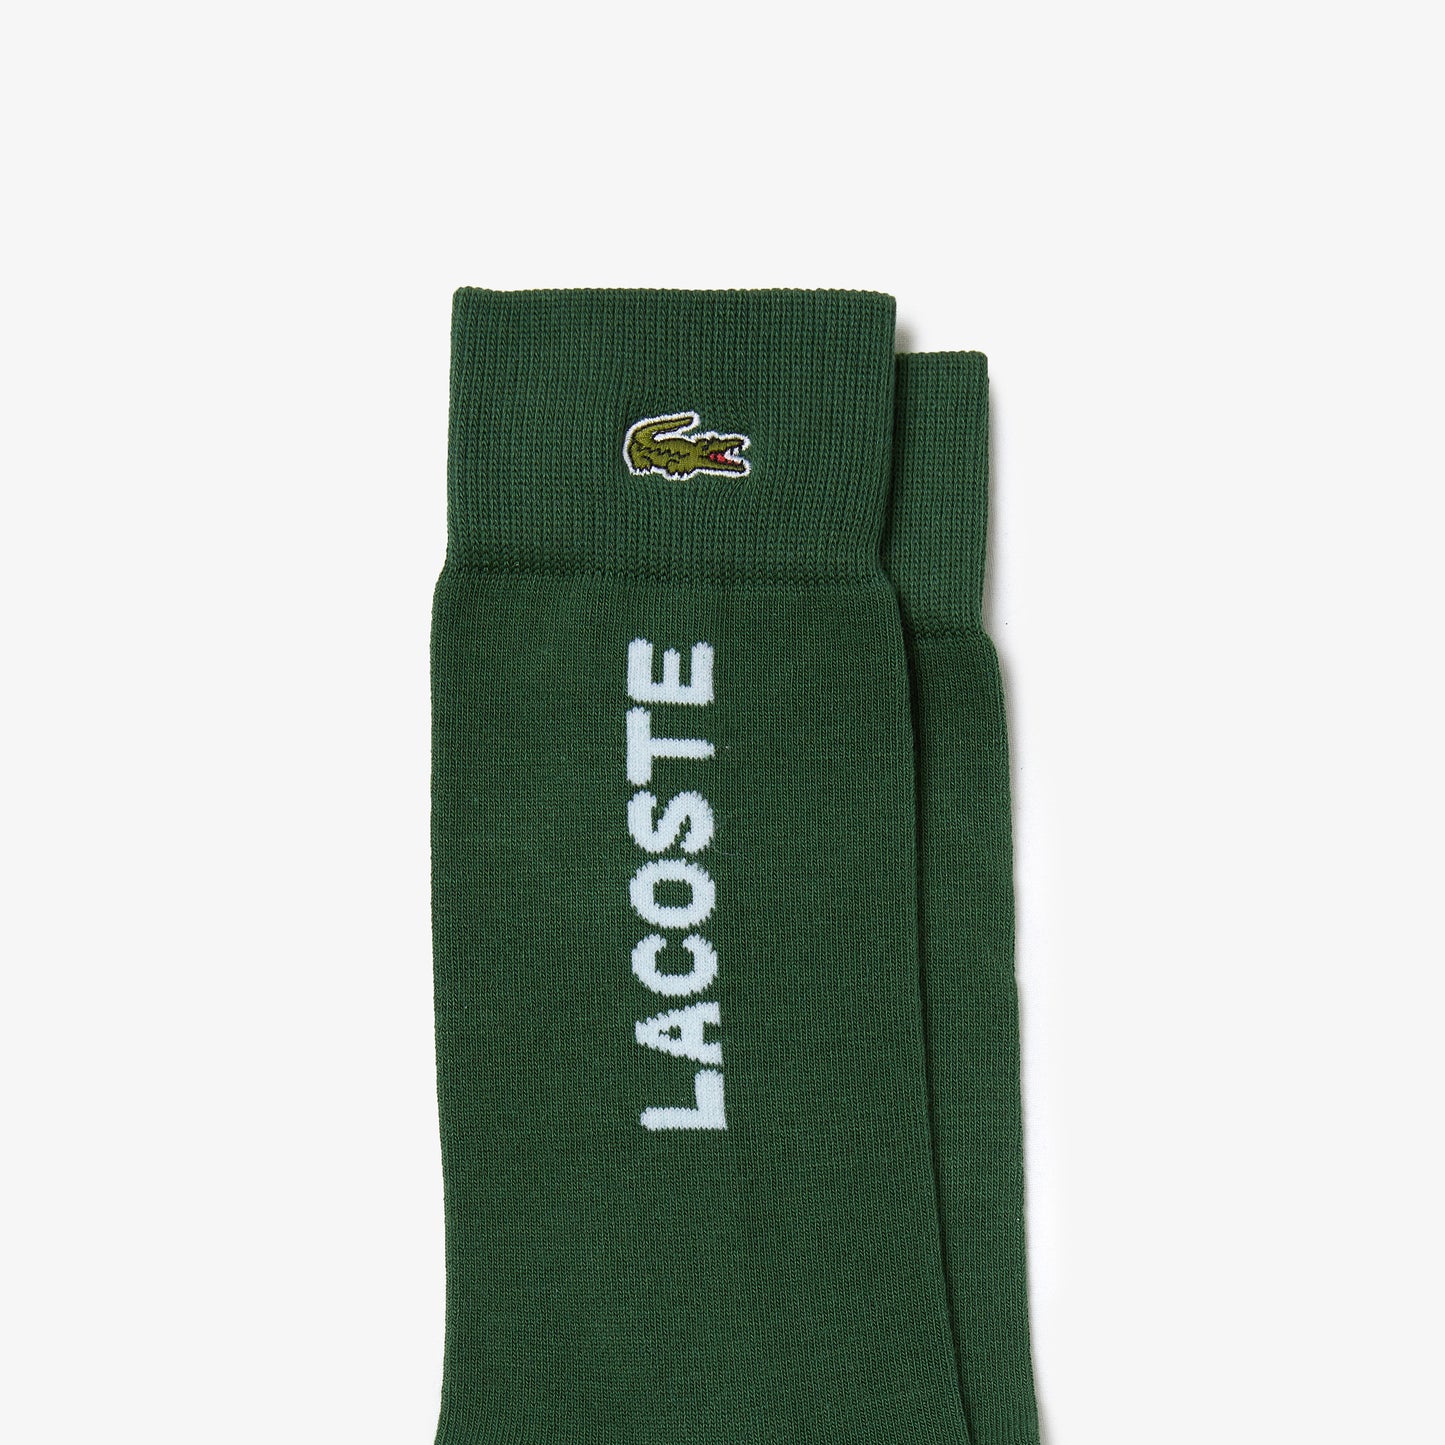 Calcetines LACOSTE tri - RA4263-00 LLY